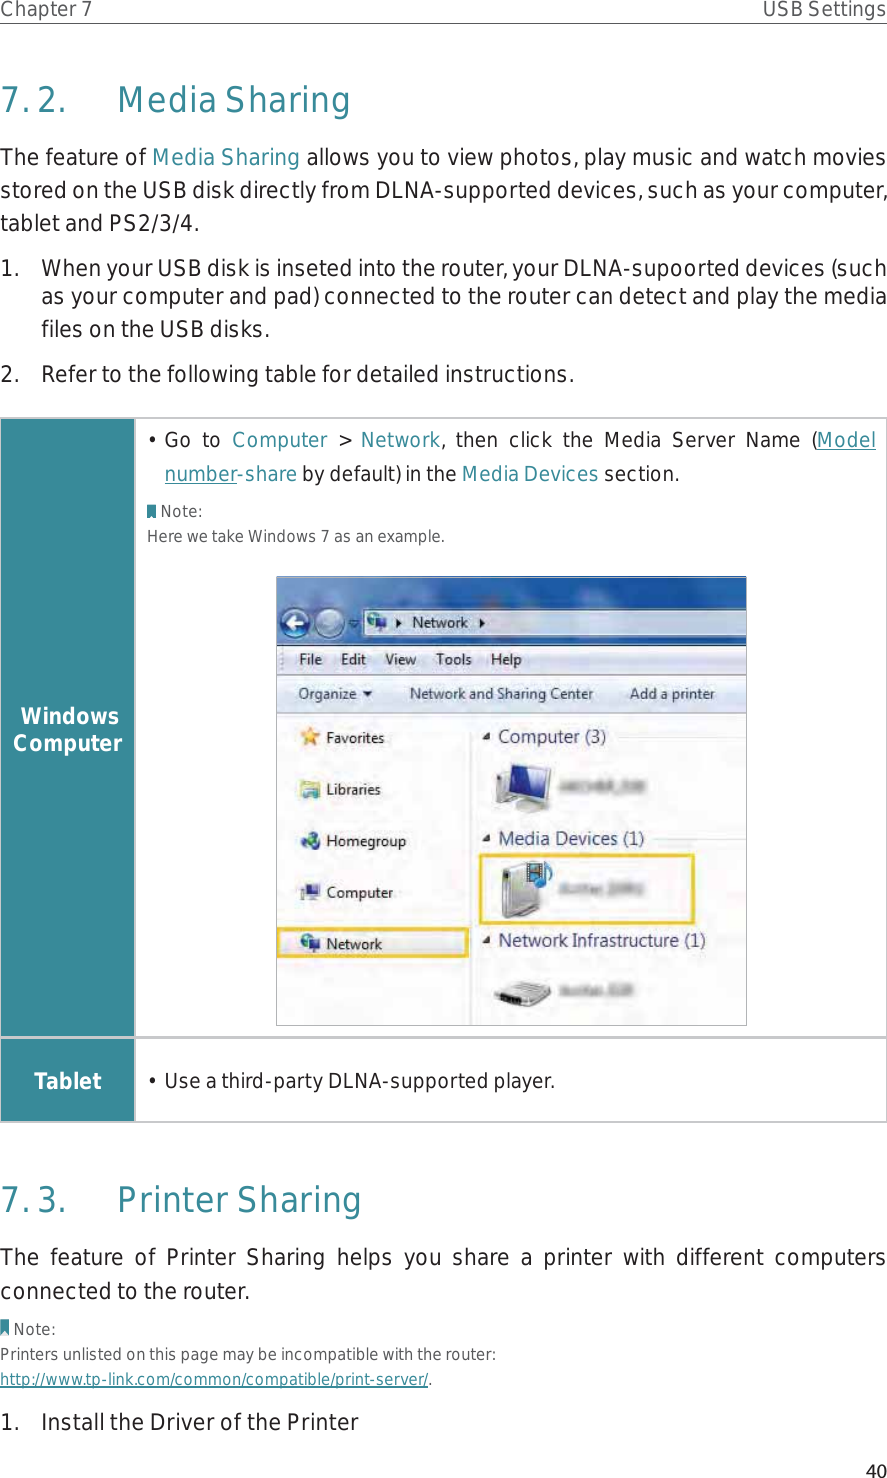 40Chapter 7 USB Settings7. 2.  Media SharingThe feature of Media Sharing allows you to view photos, play music and watch movies stored on the USB disk directly from DLNA-supported devices, such as your computer, tablet and PS2/3/4.1.  When your USB disk is inseted into the router, your DLNA-supoorted devices (such as your computer and pad) connected to the router can detect and play the media files on the USB disks.2.  Refer to the following table for detailed instructions. Windows Computer• Go to Computer &gt; Network, then click the Media Server Name (Model number-share by default) in the Media Devices section.Note:Here we take Windows 7 as an example.Tablet •  Use a third-party DLNA-supported player.7. 3.  Printer SharingThe feature of Printer Sharing helps you share a printer with different computers connected to the router.Note:Printers unlisted on this page may be incompatible with the router: http://www.tp-link.com/common/compatible/print-server/.1.  Install the Driver of the Printer